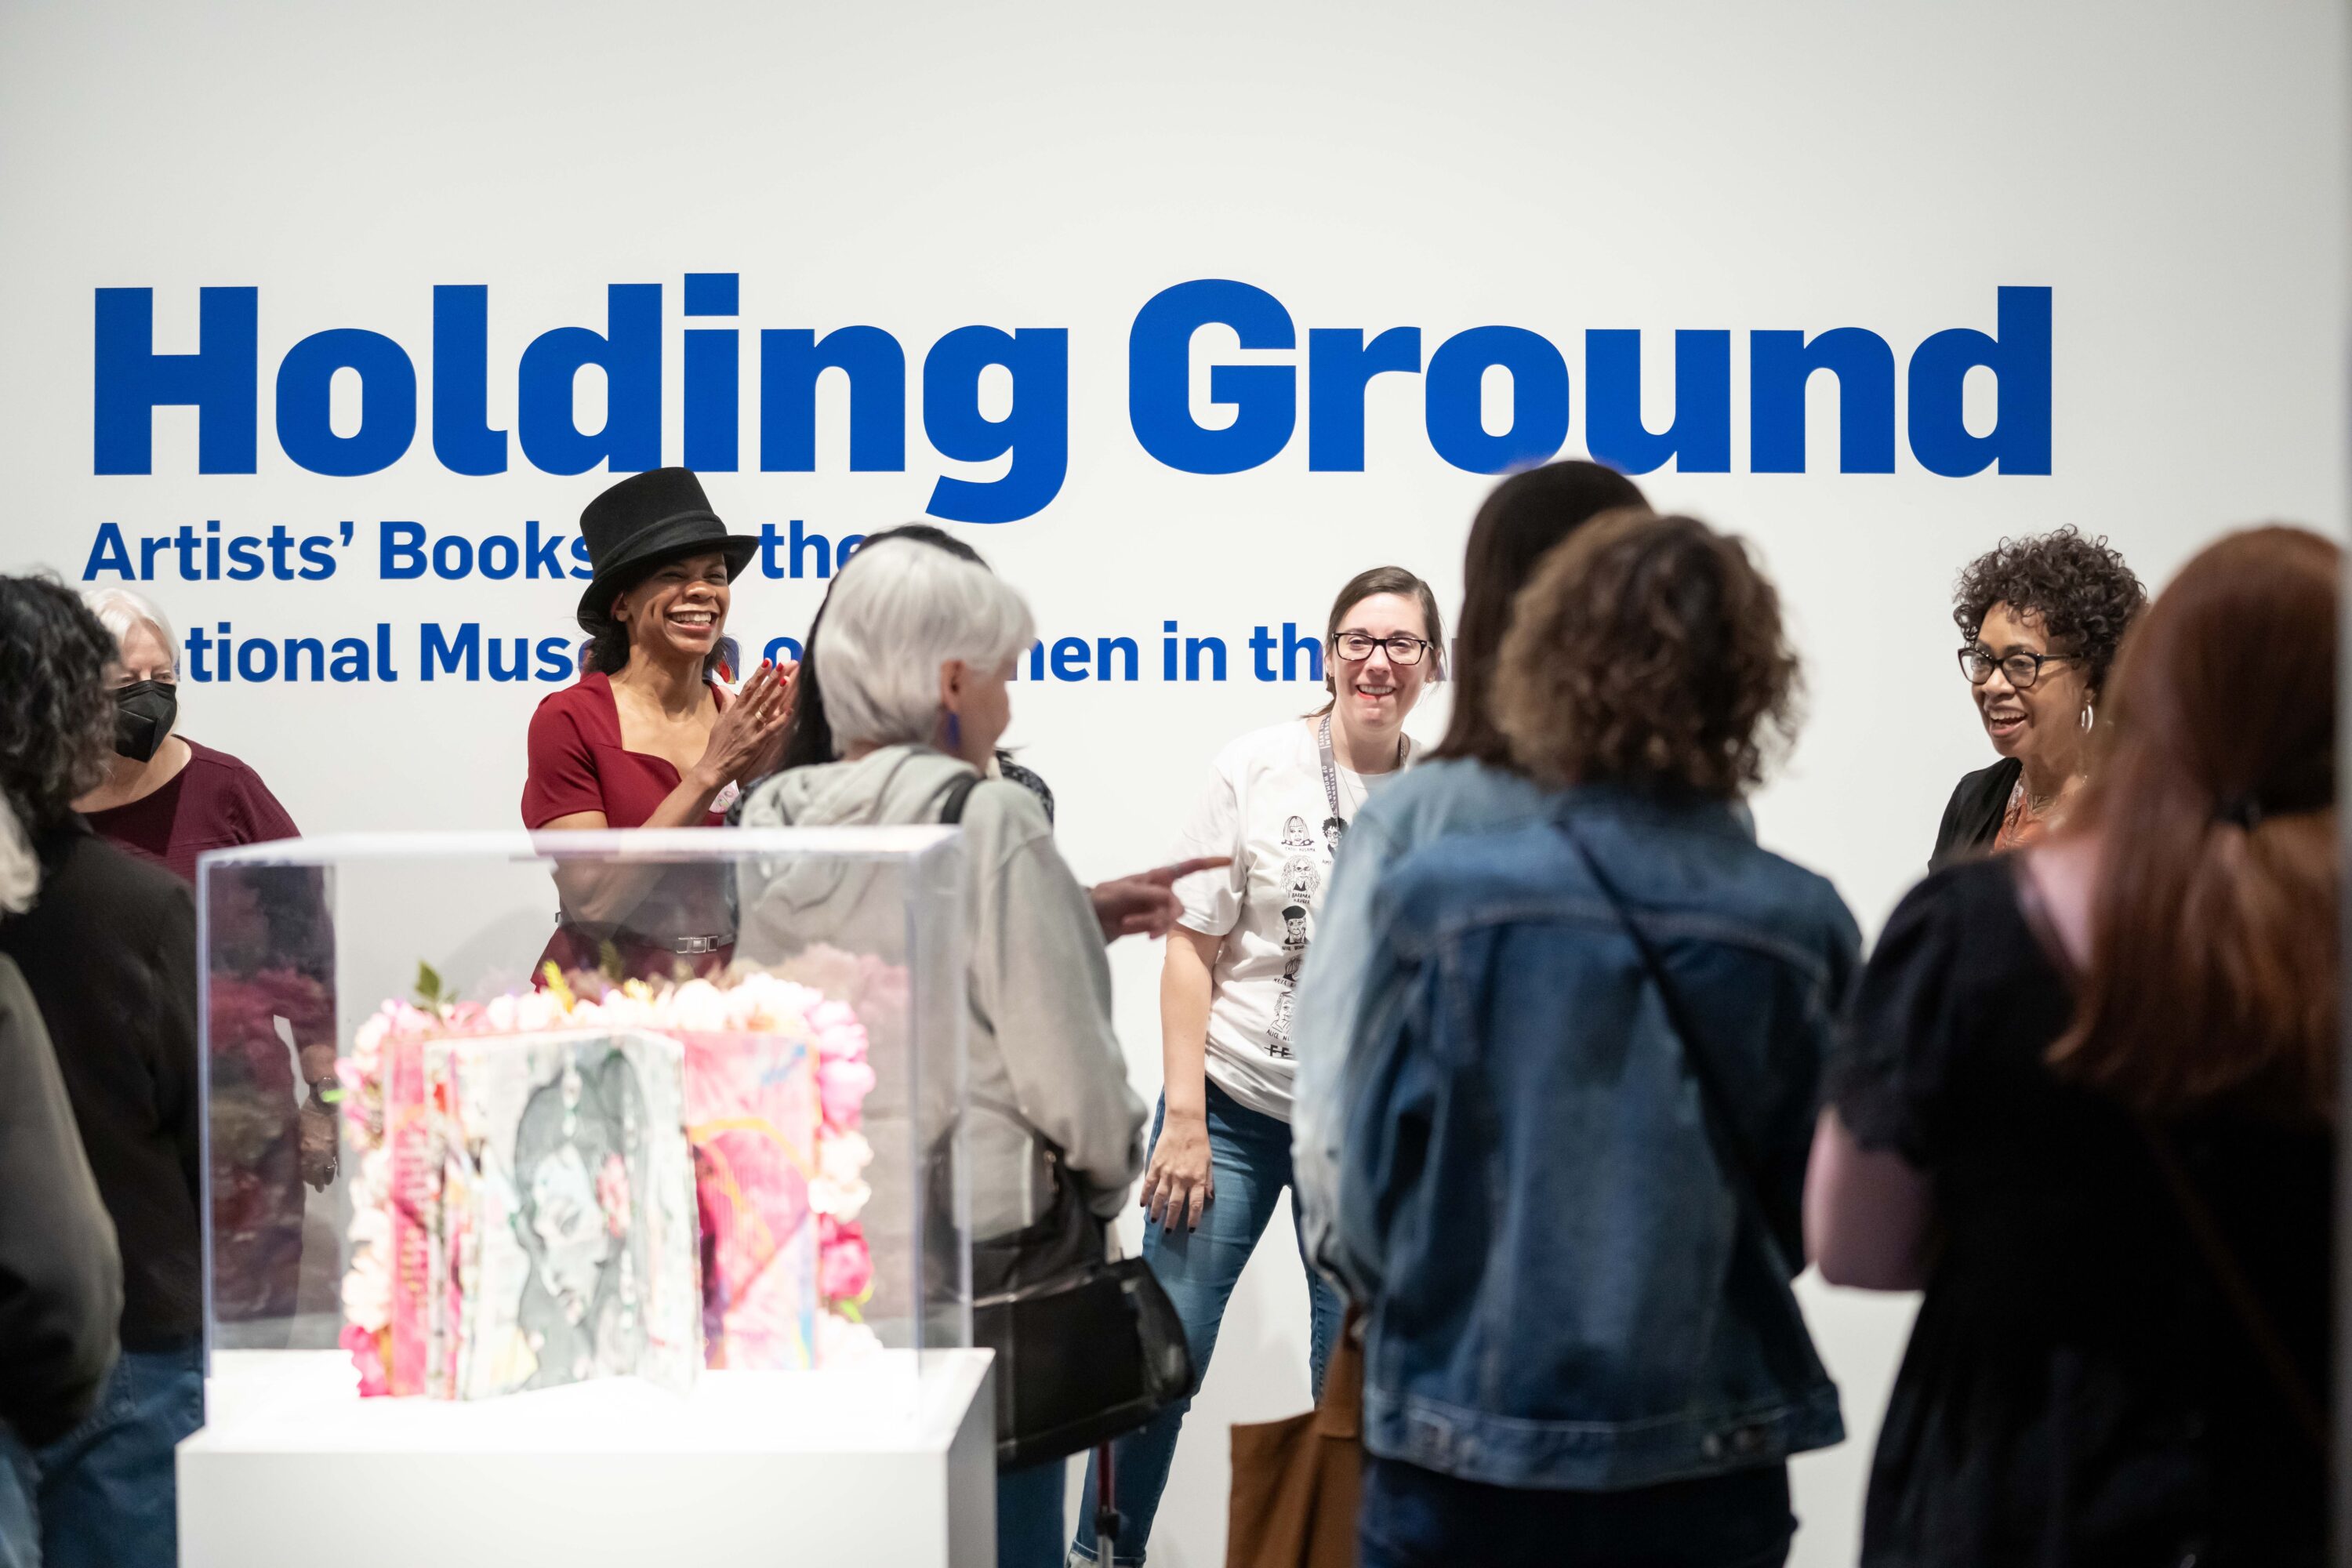 Many people of different ages and races stand in a white-walled museum gallery, some smiling and clapping. A display case containing an artist's book is in the center of the room. Behind everyone, on the wall, is large blue text that reads "Holding Ground: Artists' Books for the National Museum of Women in the Arts."